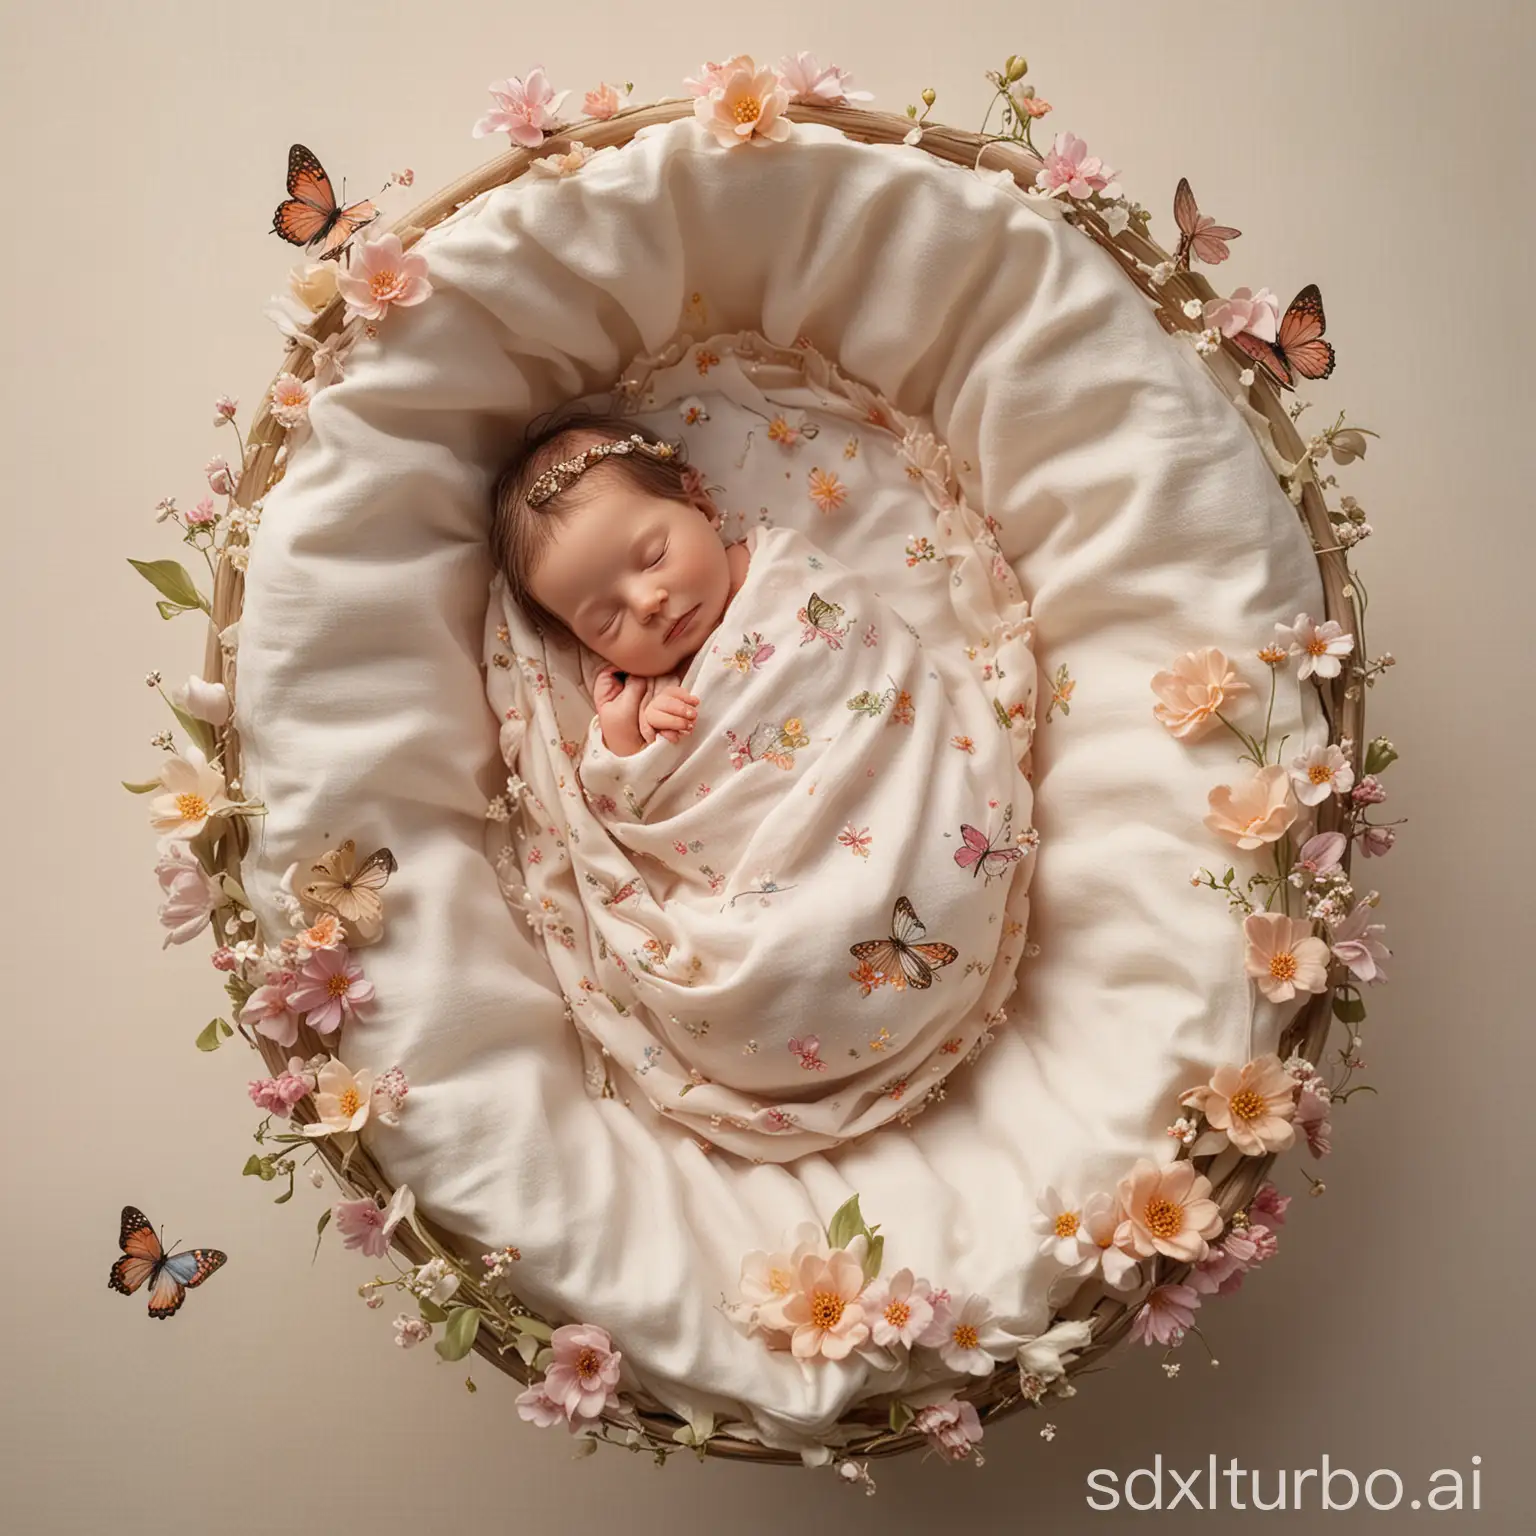 Die kleine Fee: A newborn sleeps in a cradle, which is designed like a flower bud. Wrapped in fragrant, floral soft bed linen, it dreams under floating, glowing fairies, who scatter stardust. A plush butterfly lies protectively next to it.